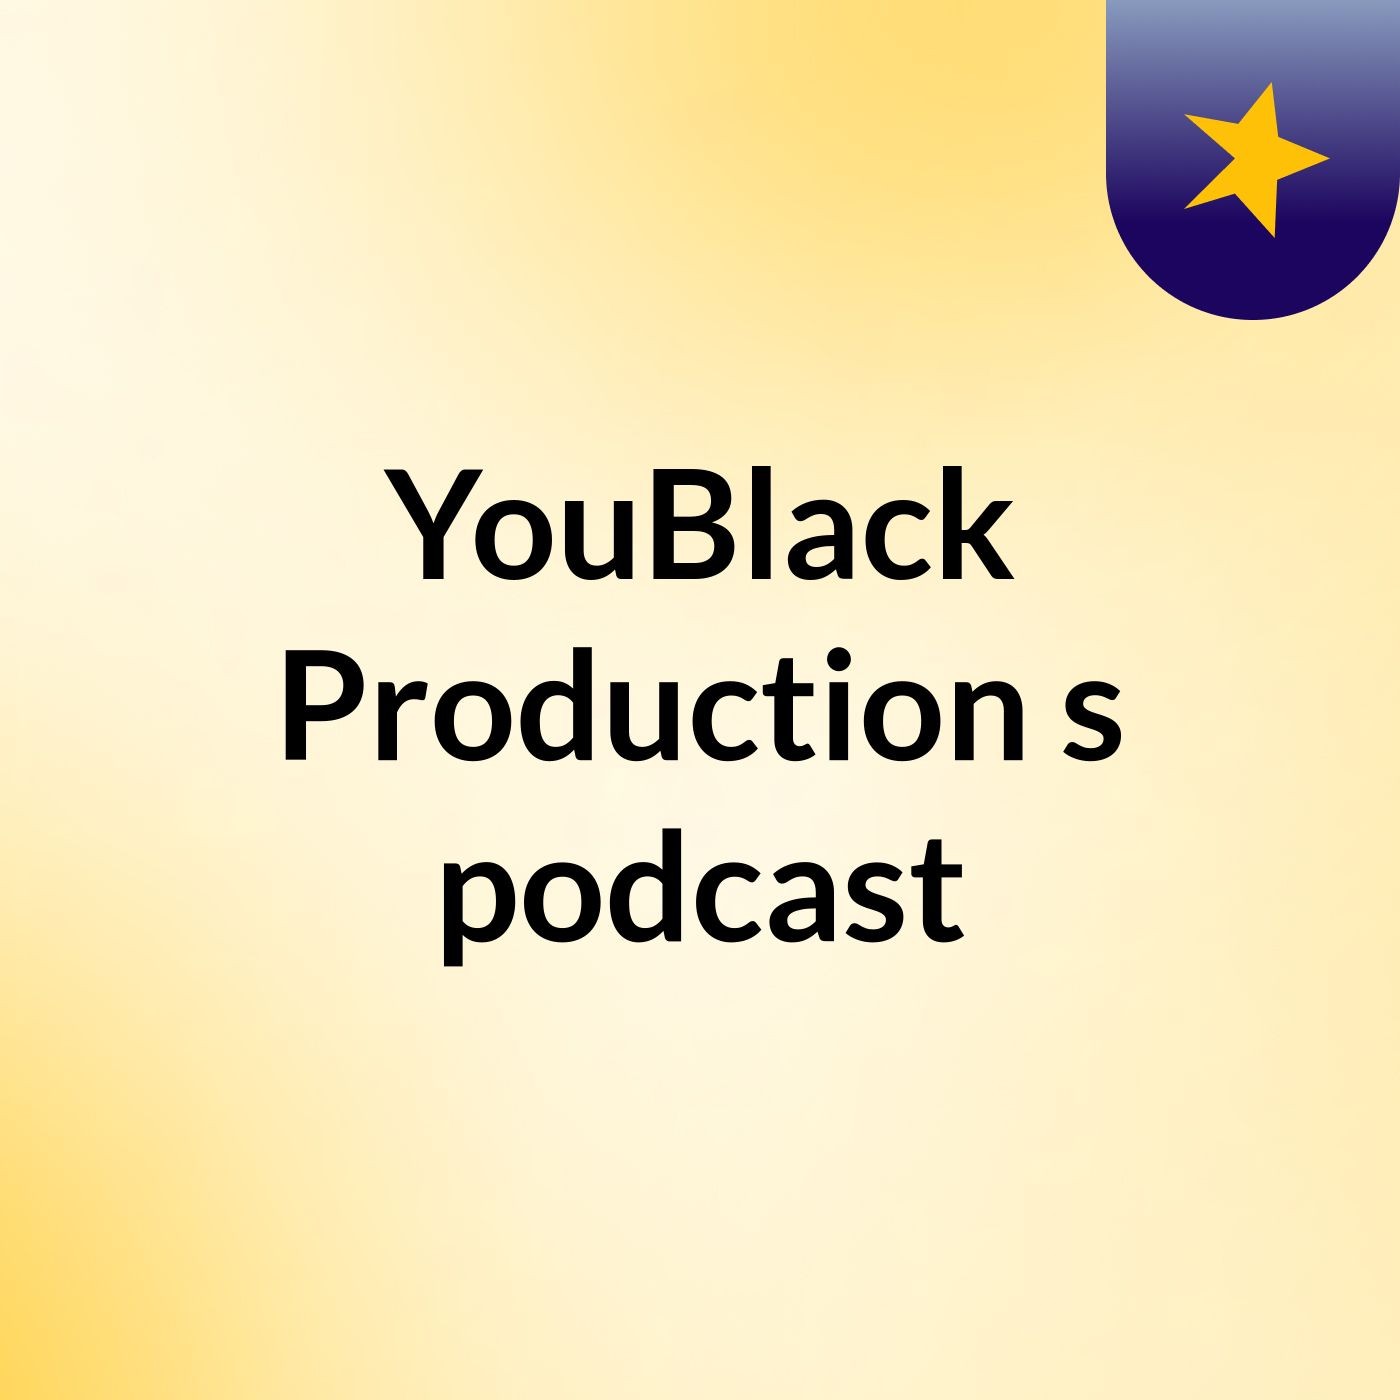 YouBlack Production's podcast